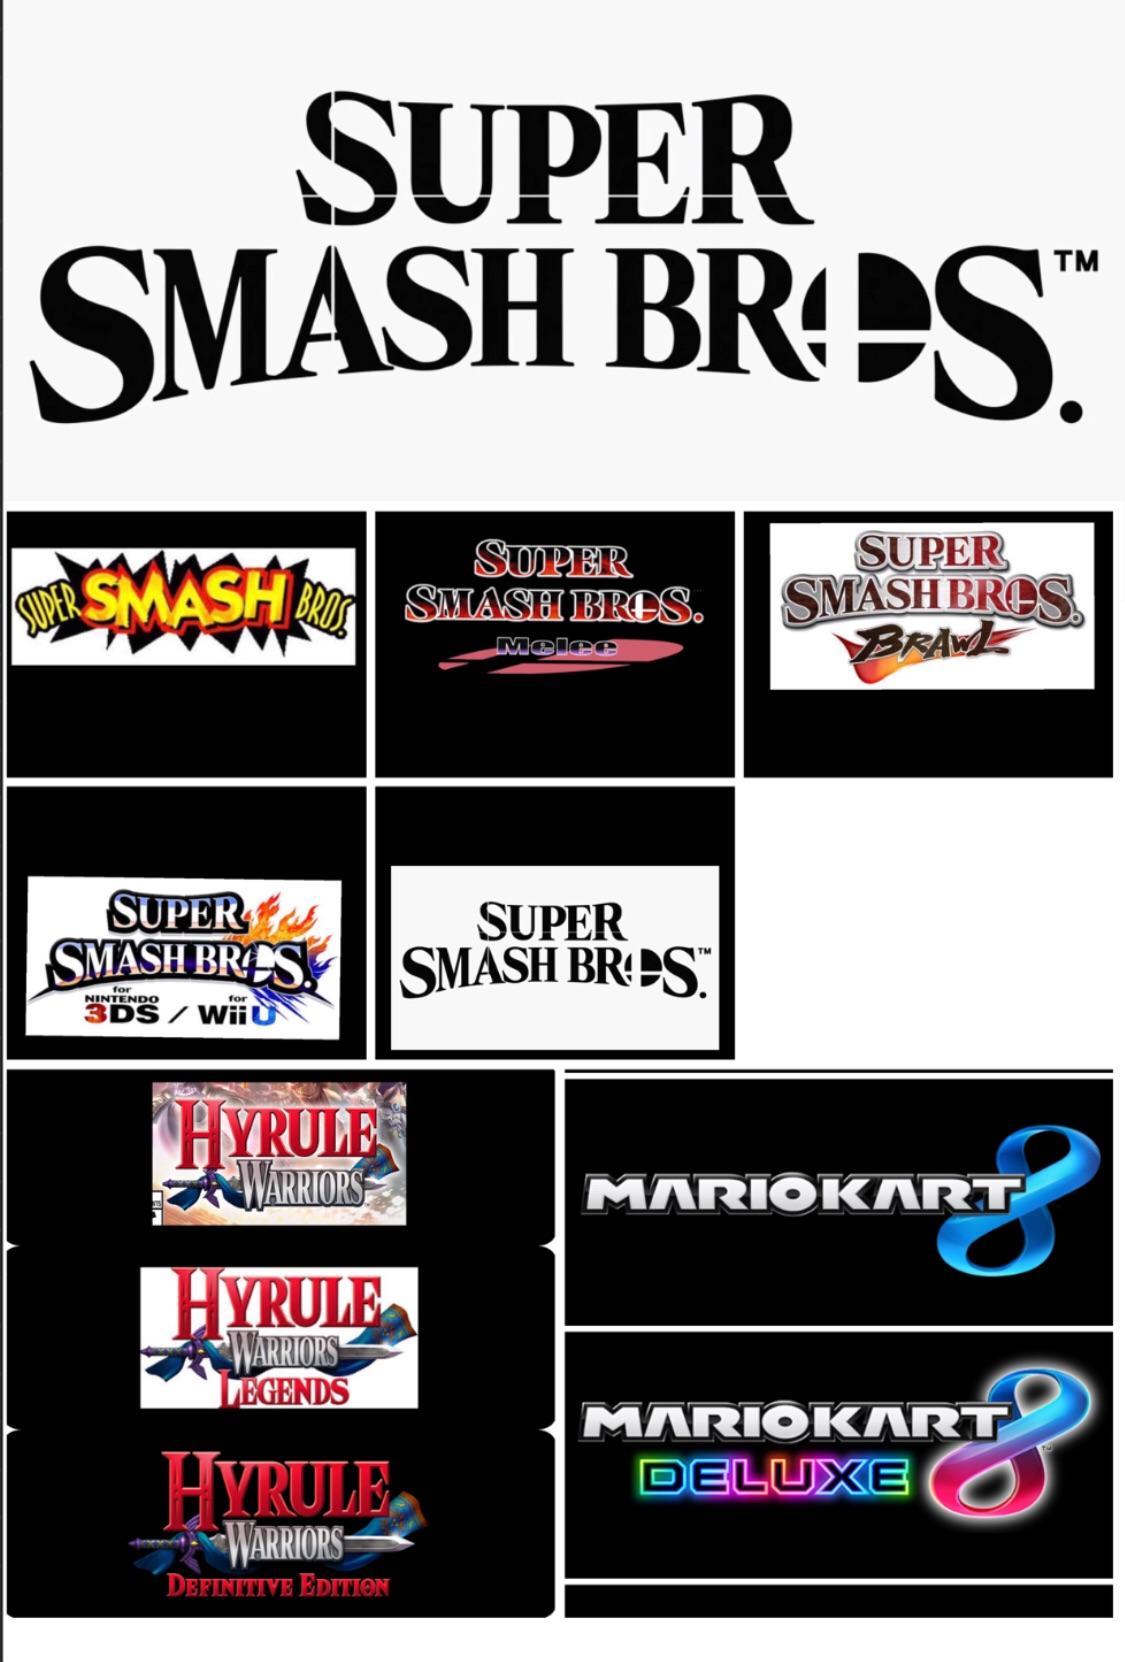 Melee Logo - Haven't seen this discussed here: Logo variations between port